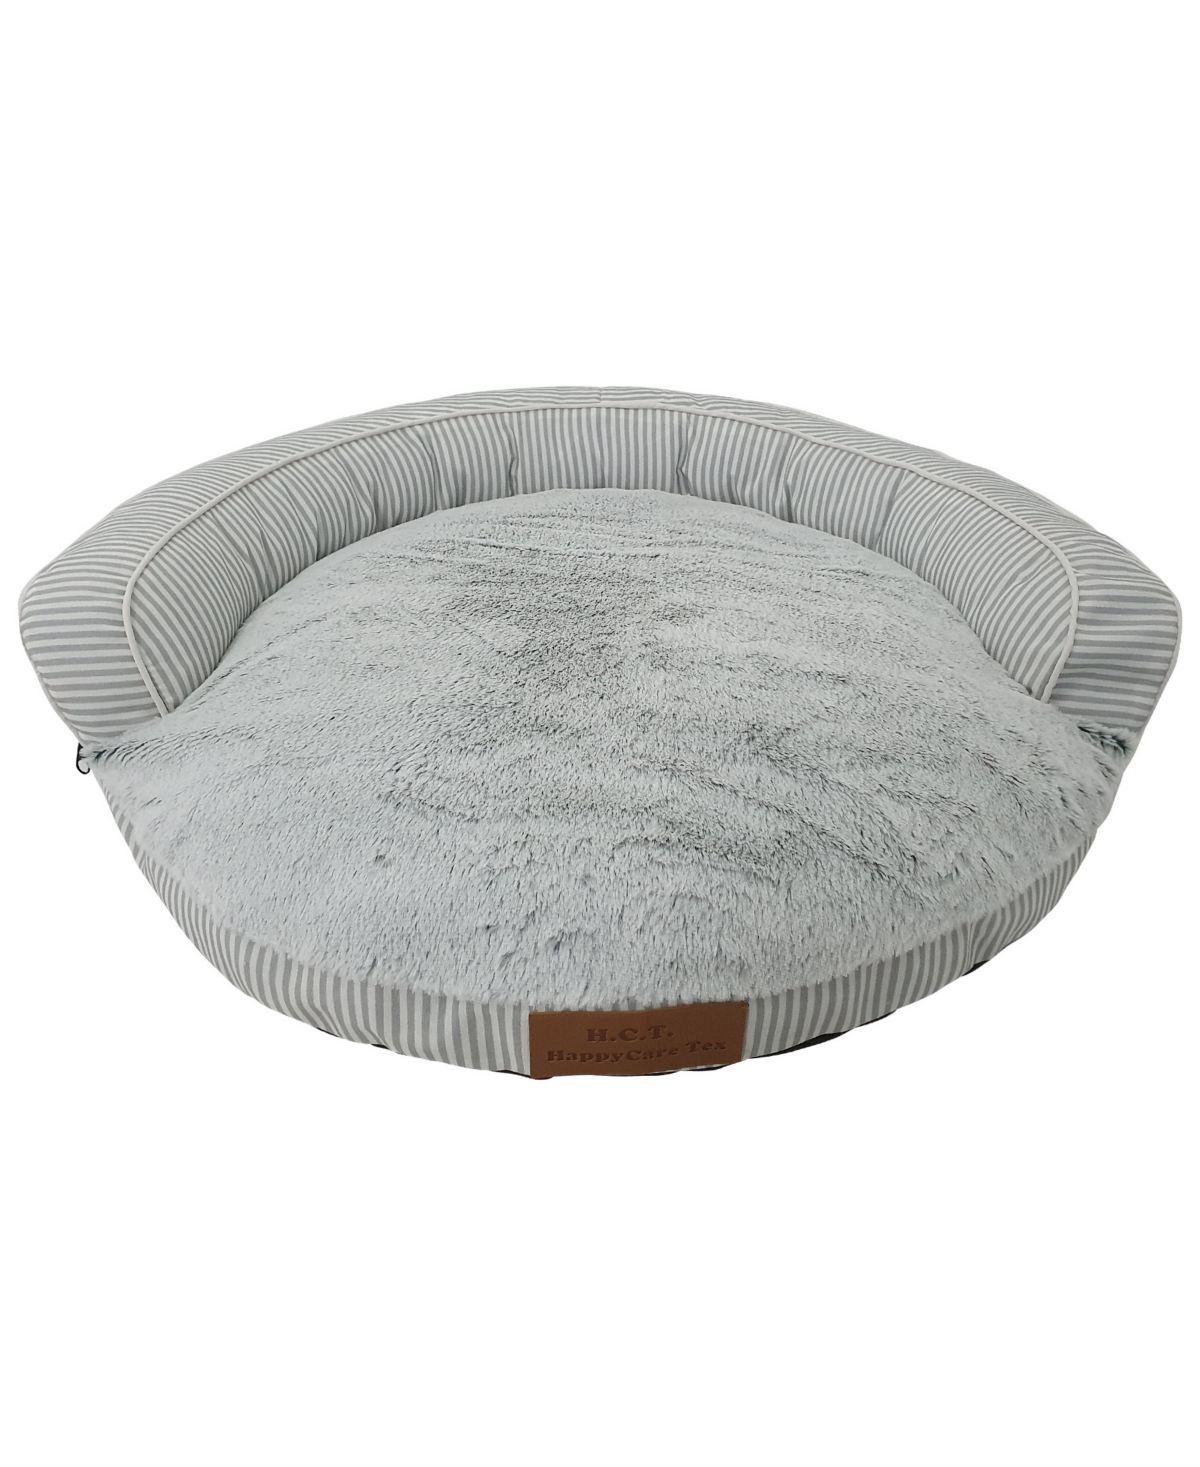 Macy's Canvas Round Pet Sofa Bed, Extra Large In Stripe Gray